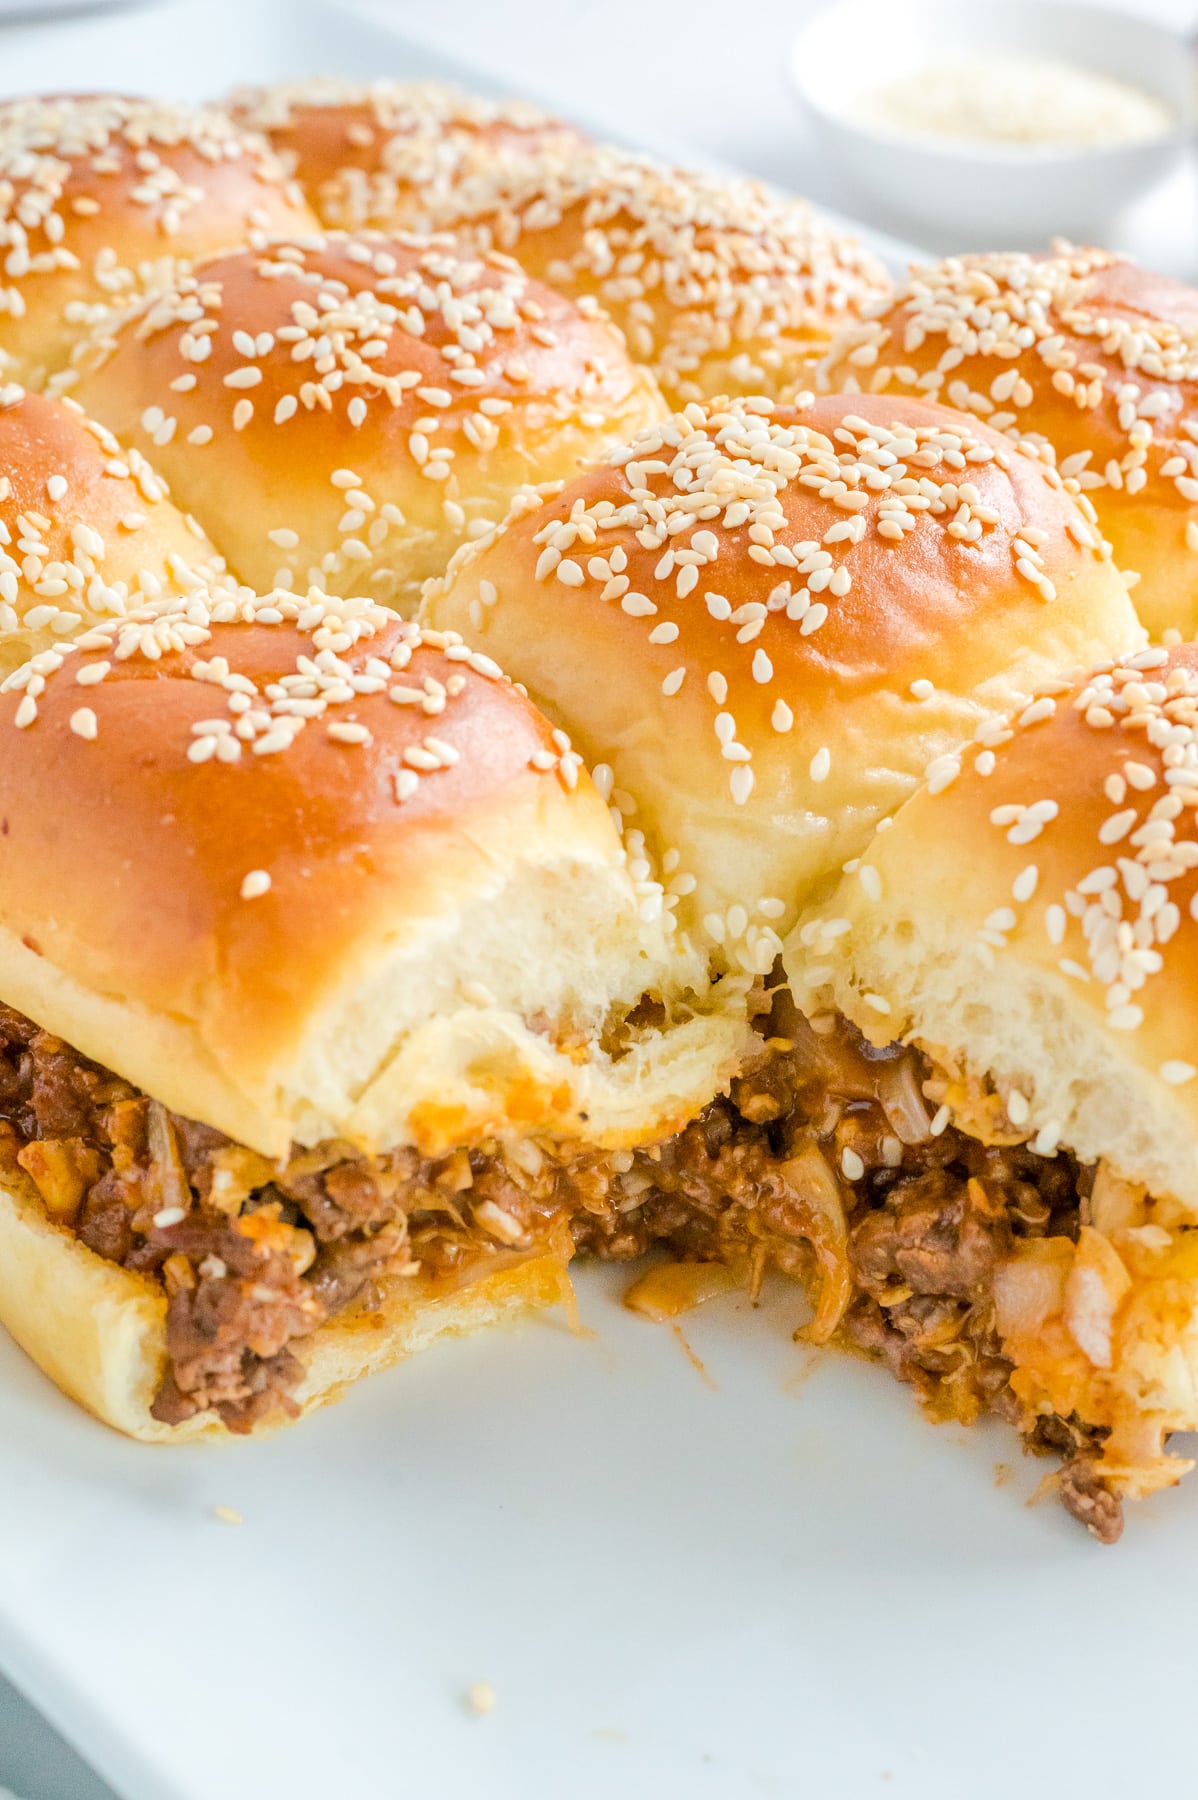 An close up on a plate of sliders with meat and sesame seeds zoomed in on the meaty ground beef filling.